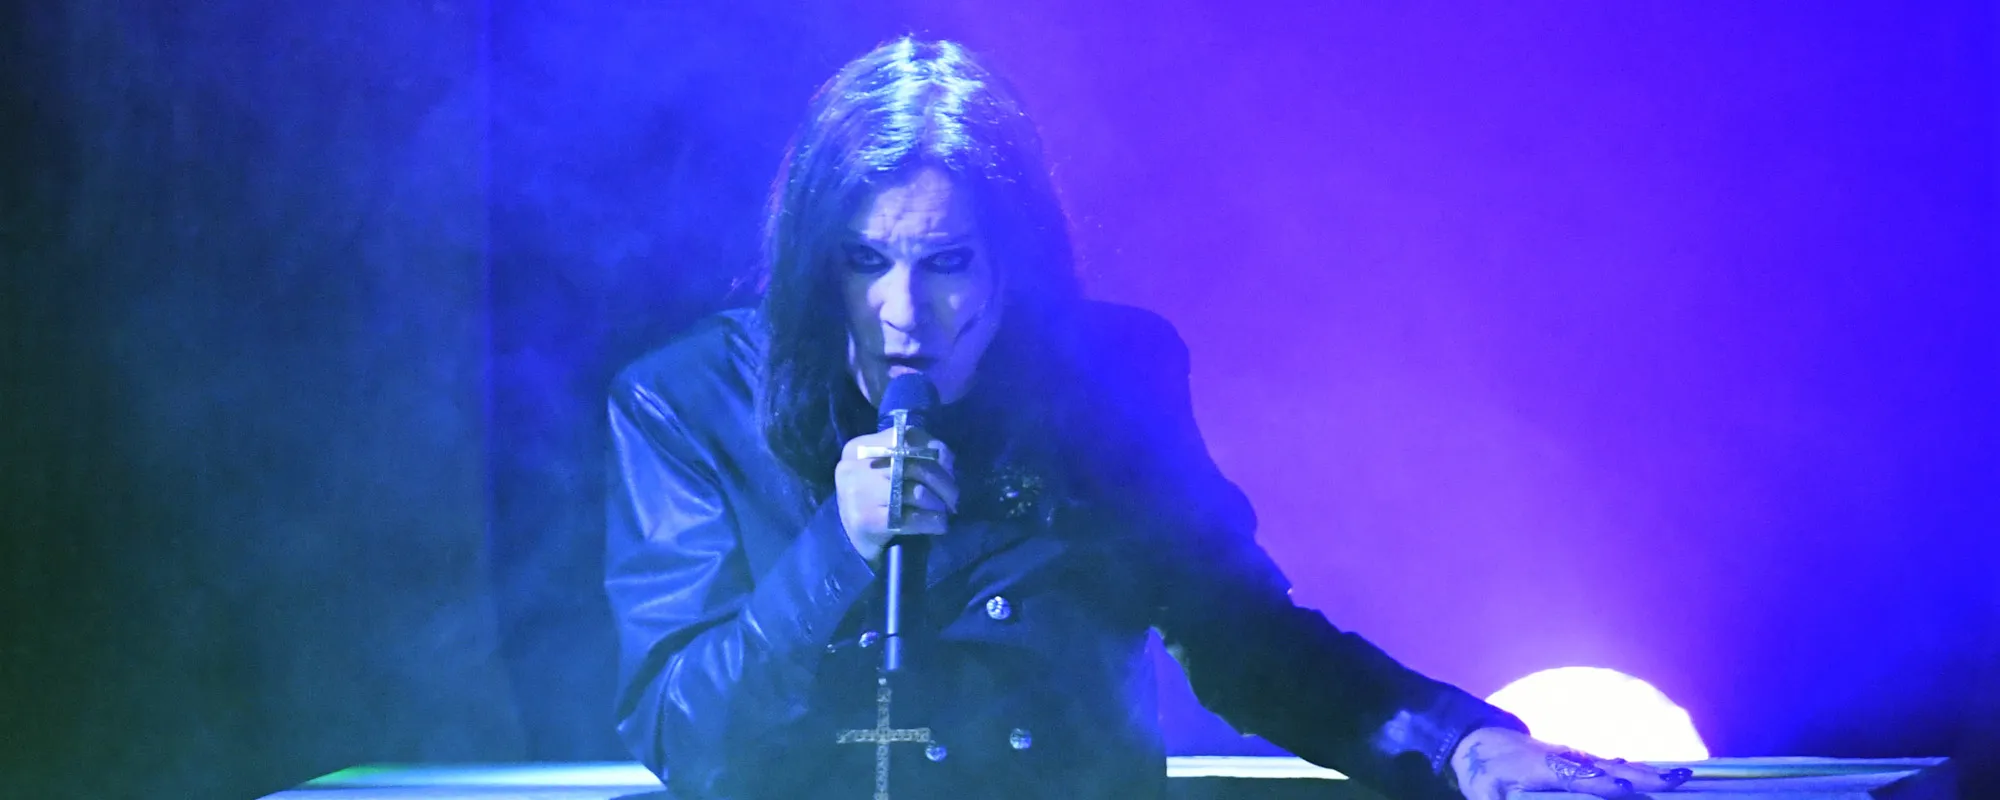 The Occult Inspiration Behind Ozzy Osbourne’s “Mr. Crowley”